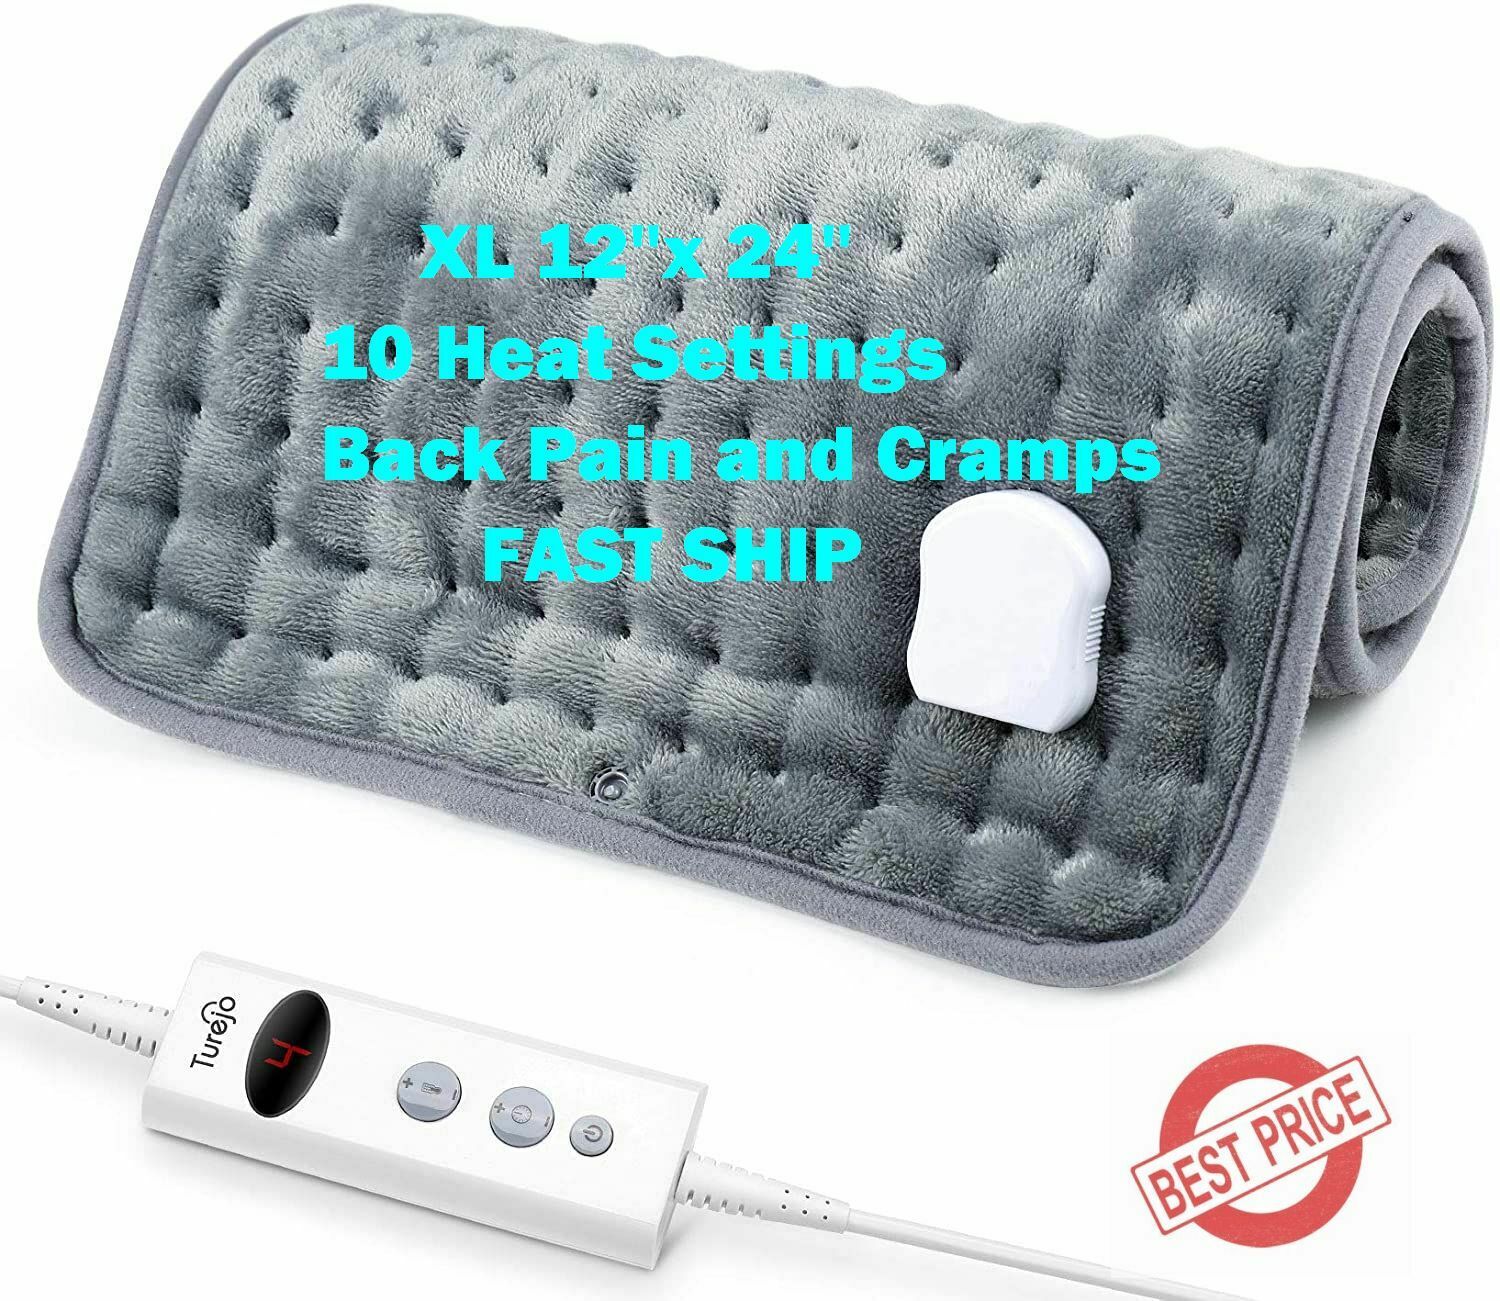 Electric Heating Pad Cramps Neck Back Pain Relief Xl Size 12"x24"